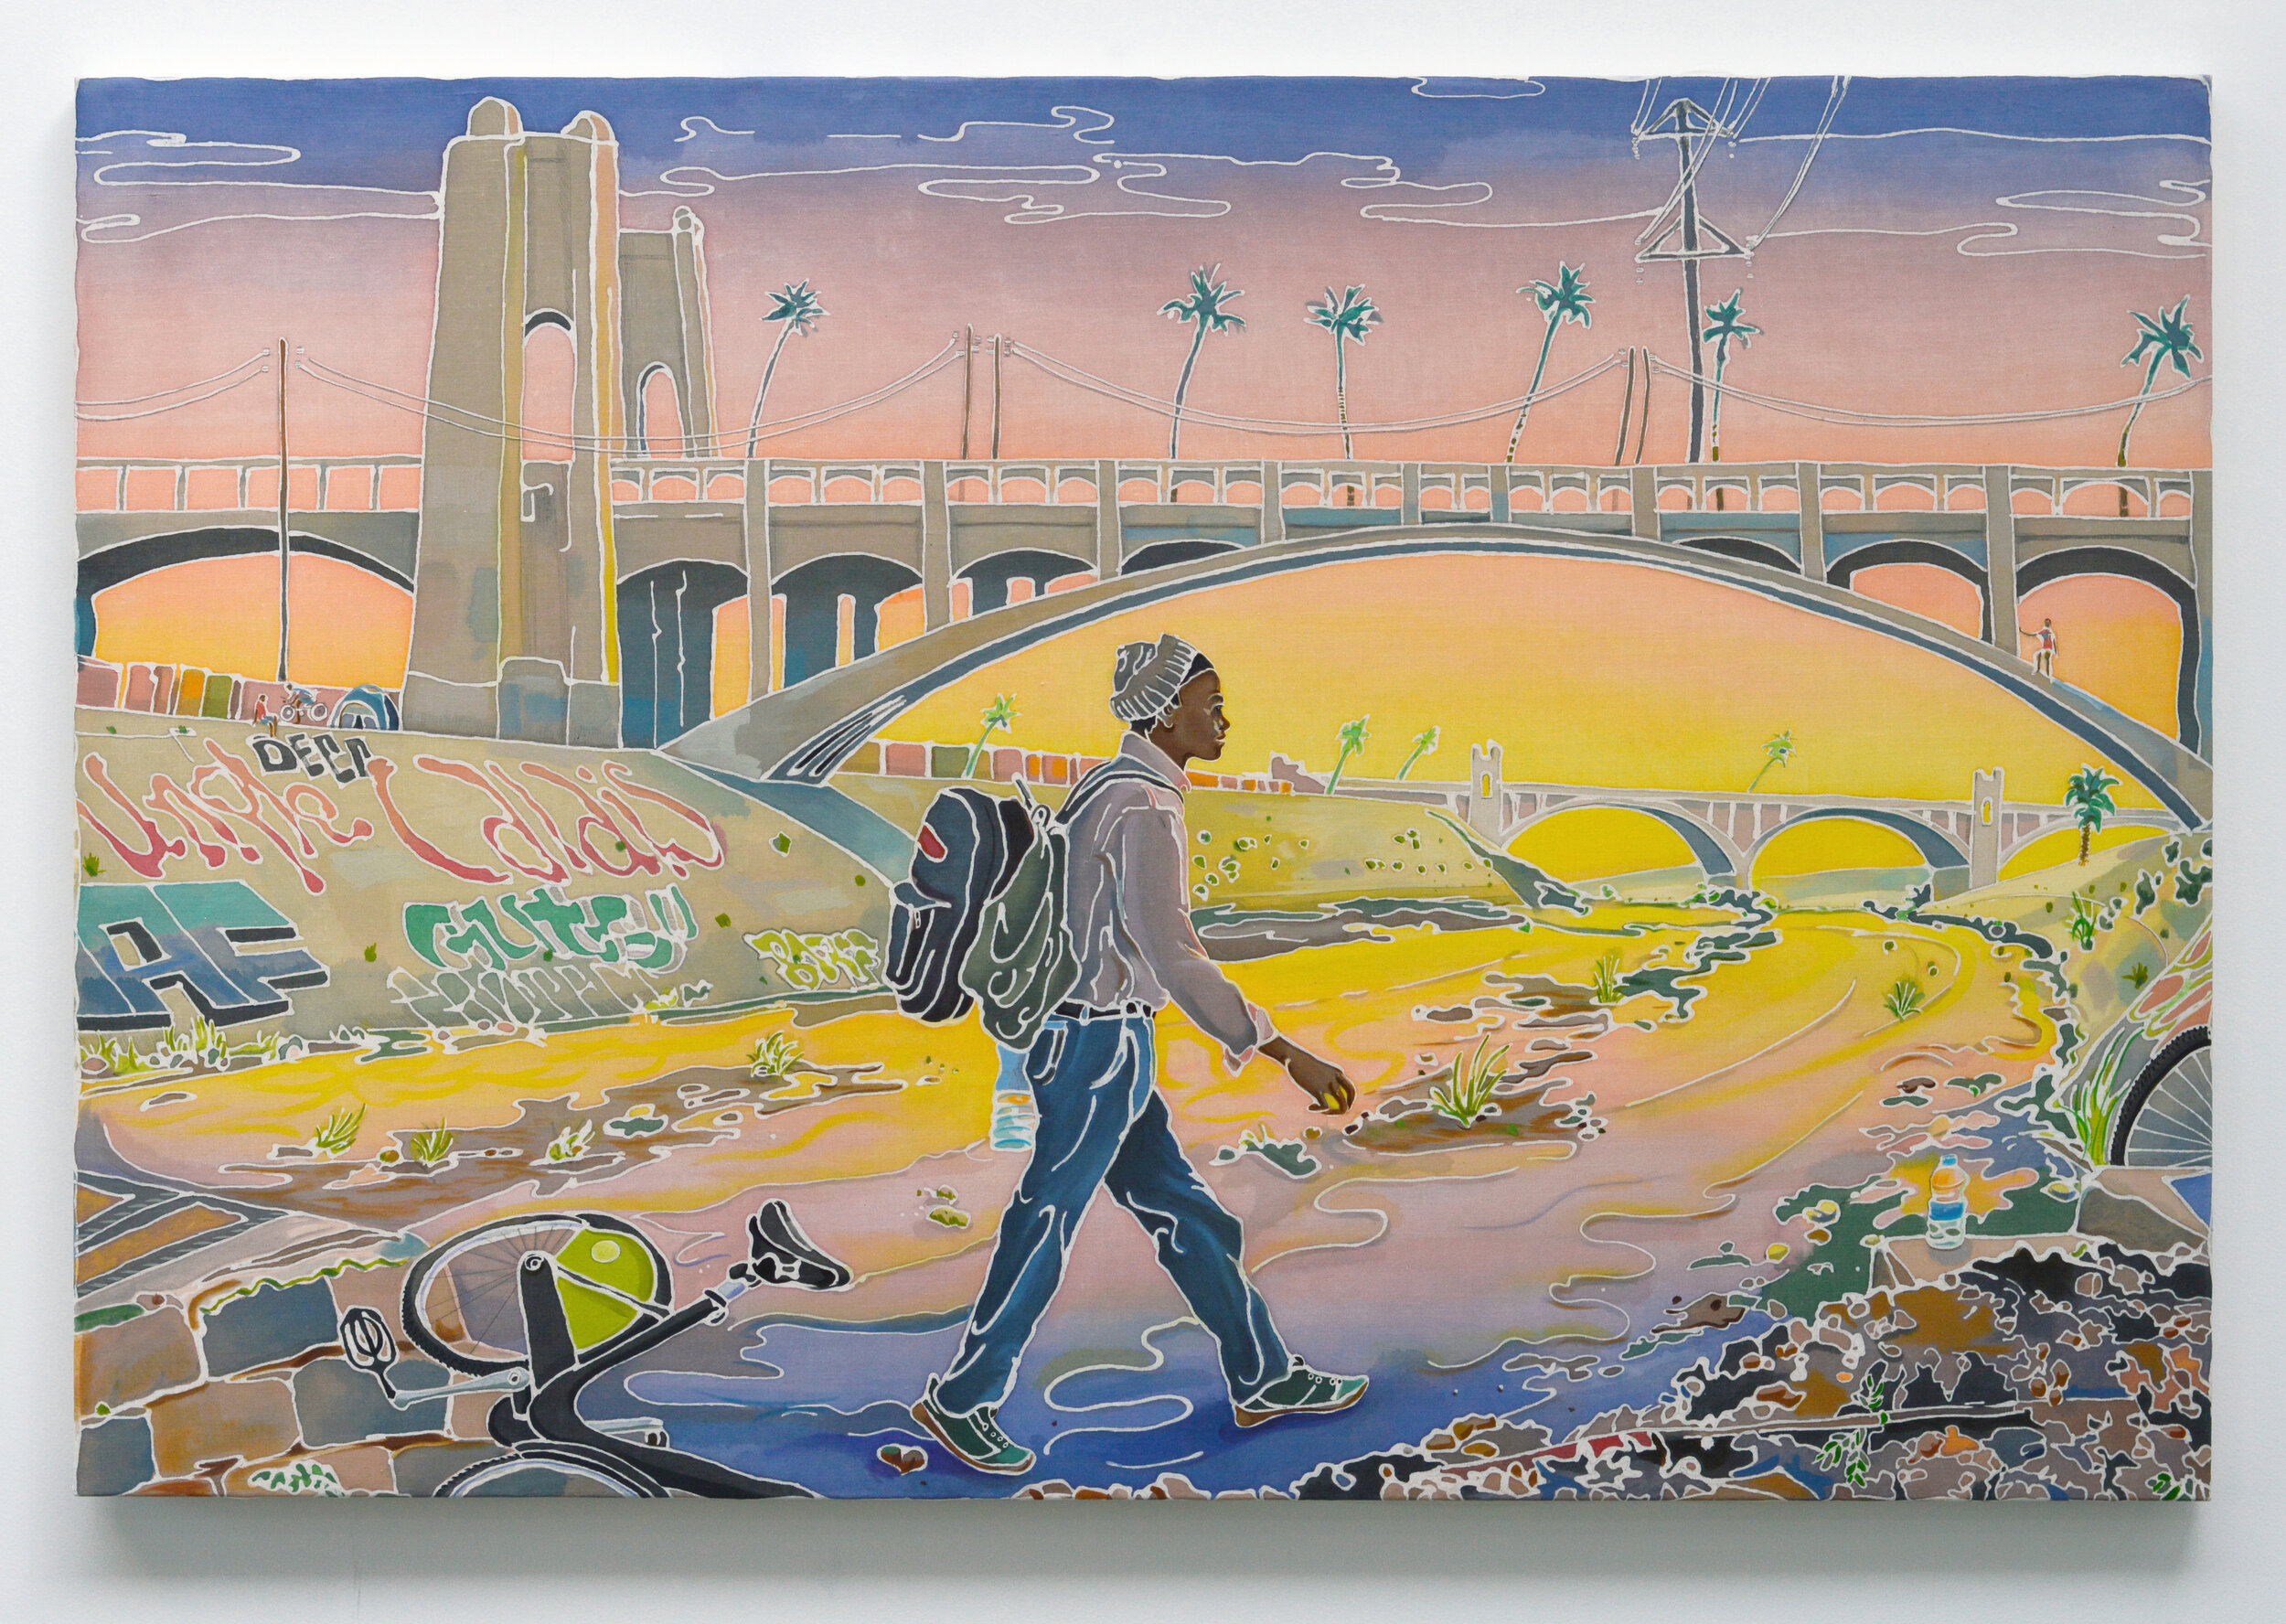   Adam de Boer   Riverwalker  2020 Wax-resist, acrylic washes and oil paint on linen 36 x 54 inches   